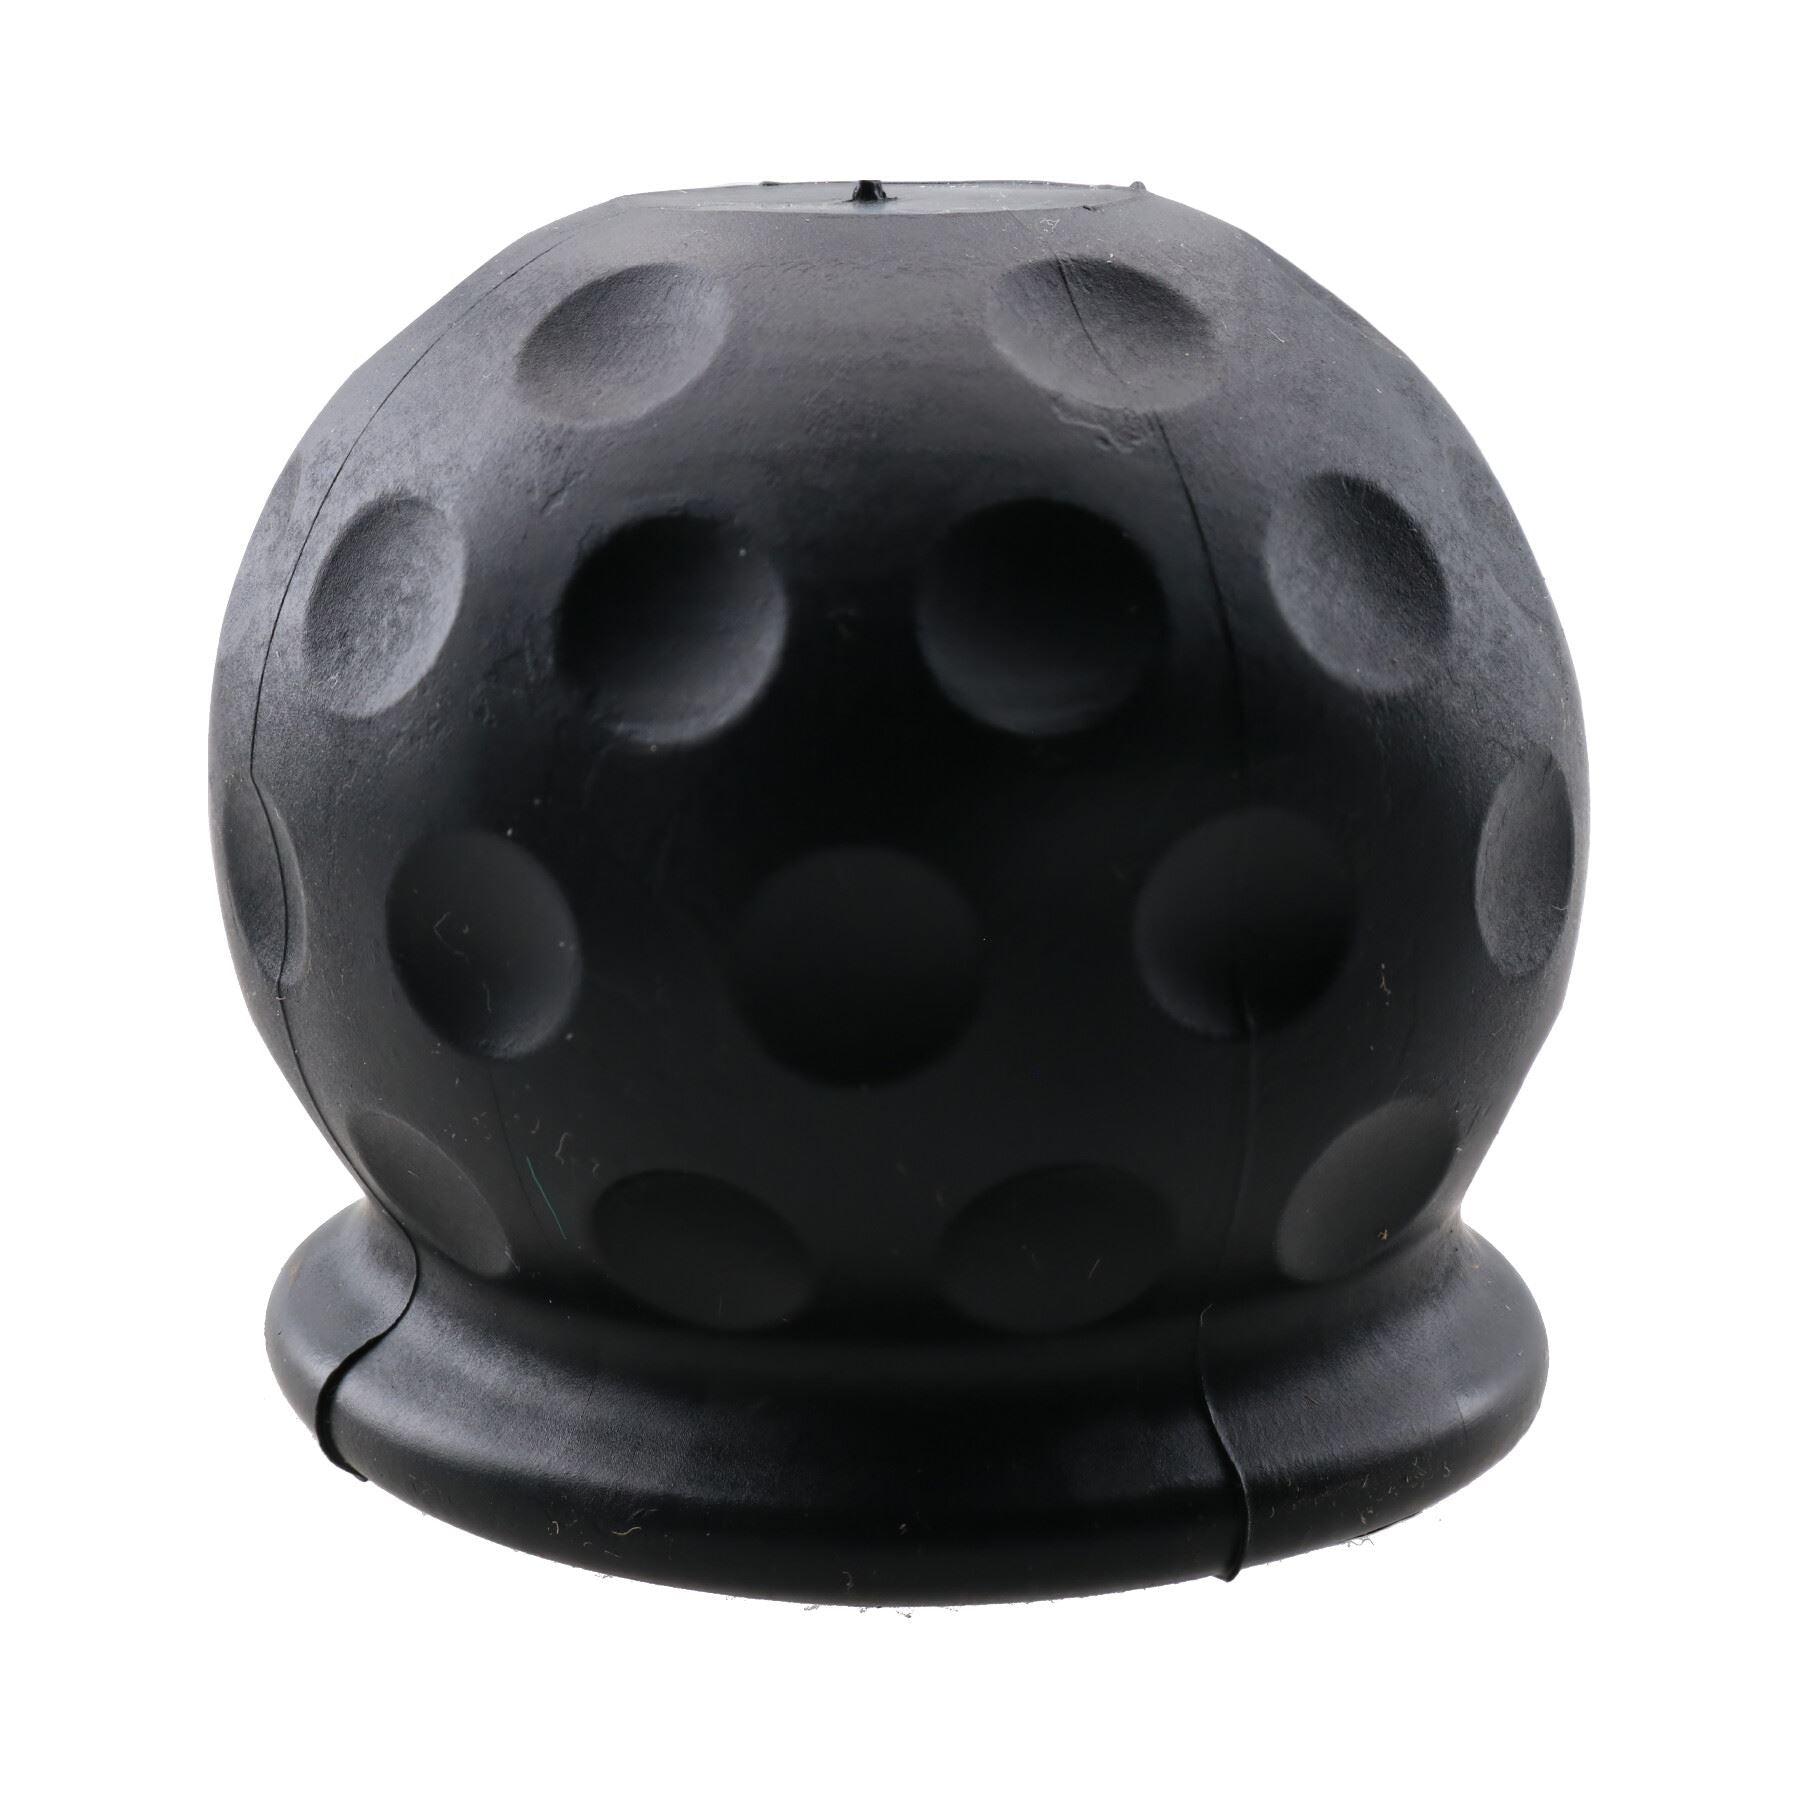 Rubber Golf Ball Style Tow Bar Cover fits all 50mm Tow Balls